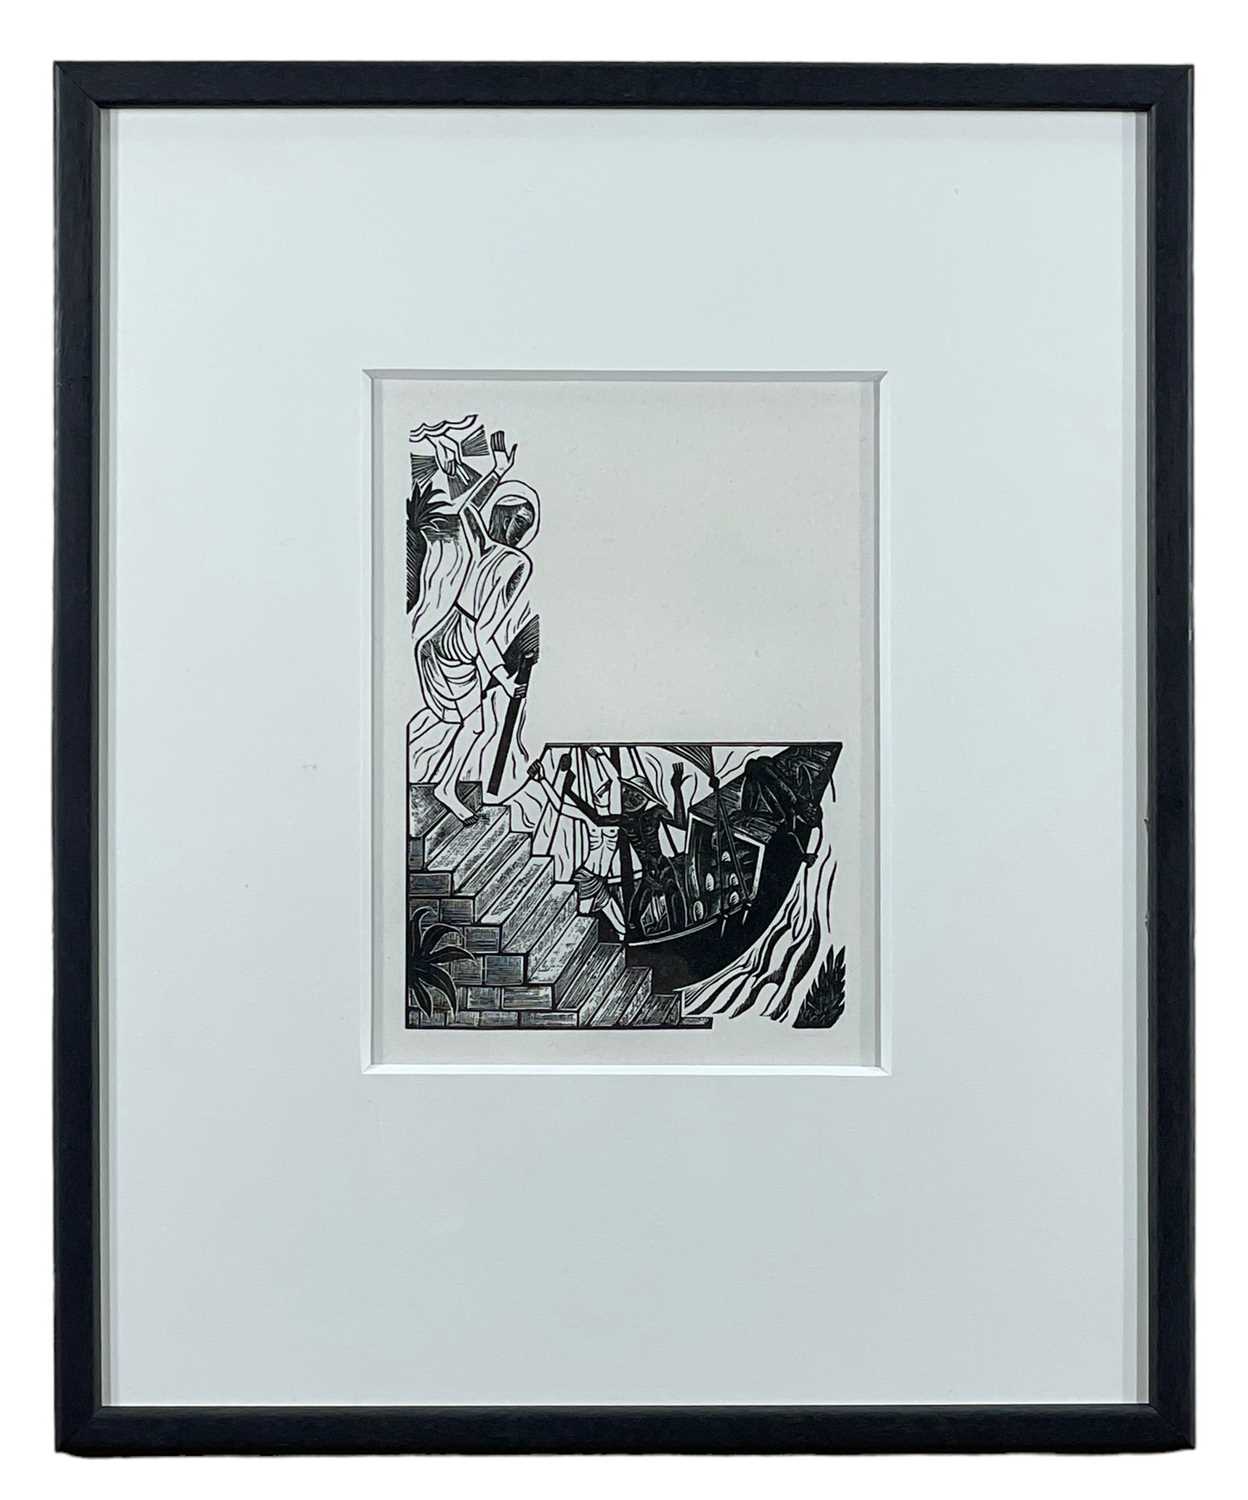 ‡ DAVID JONES 1926 limited edition (89/100) wood engraving (1979 reprint on japon paper) - - Image 2 of 2